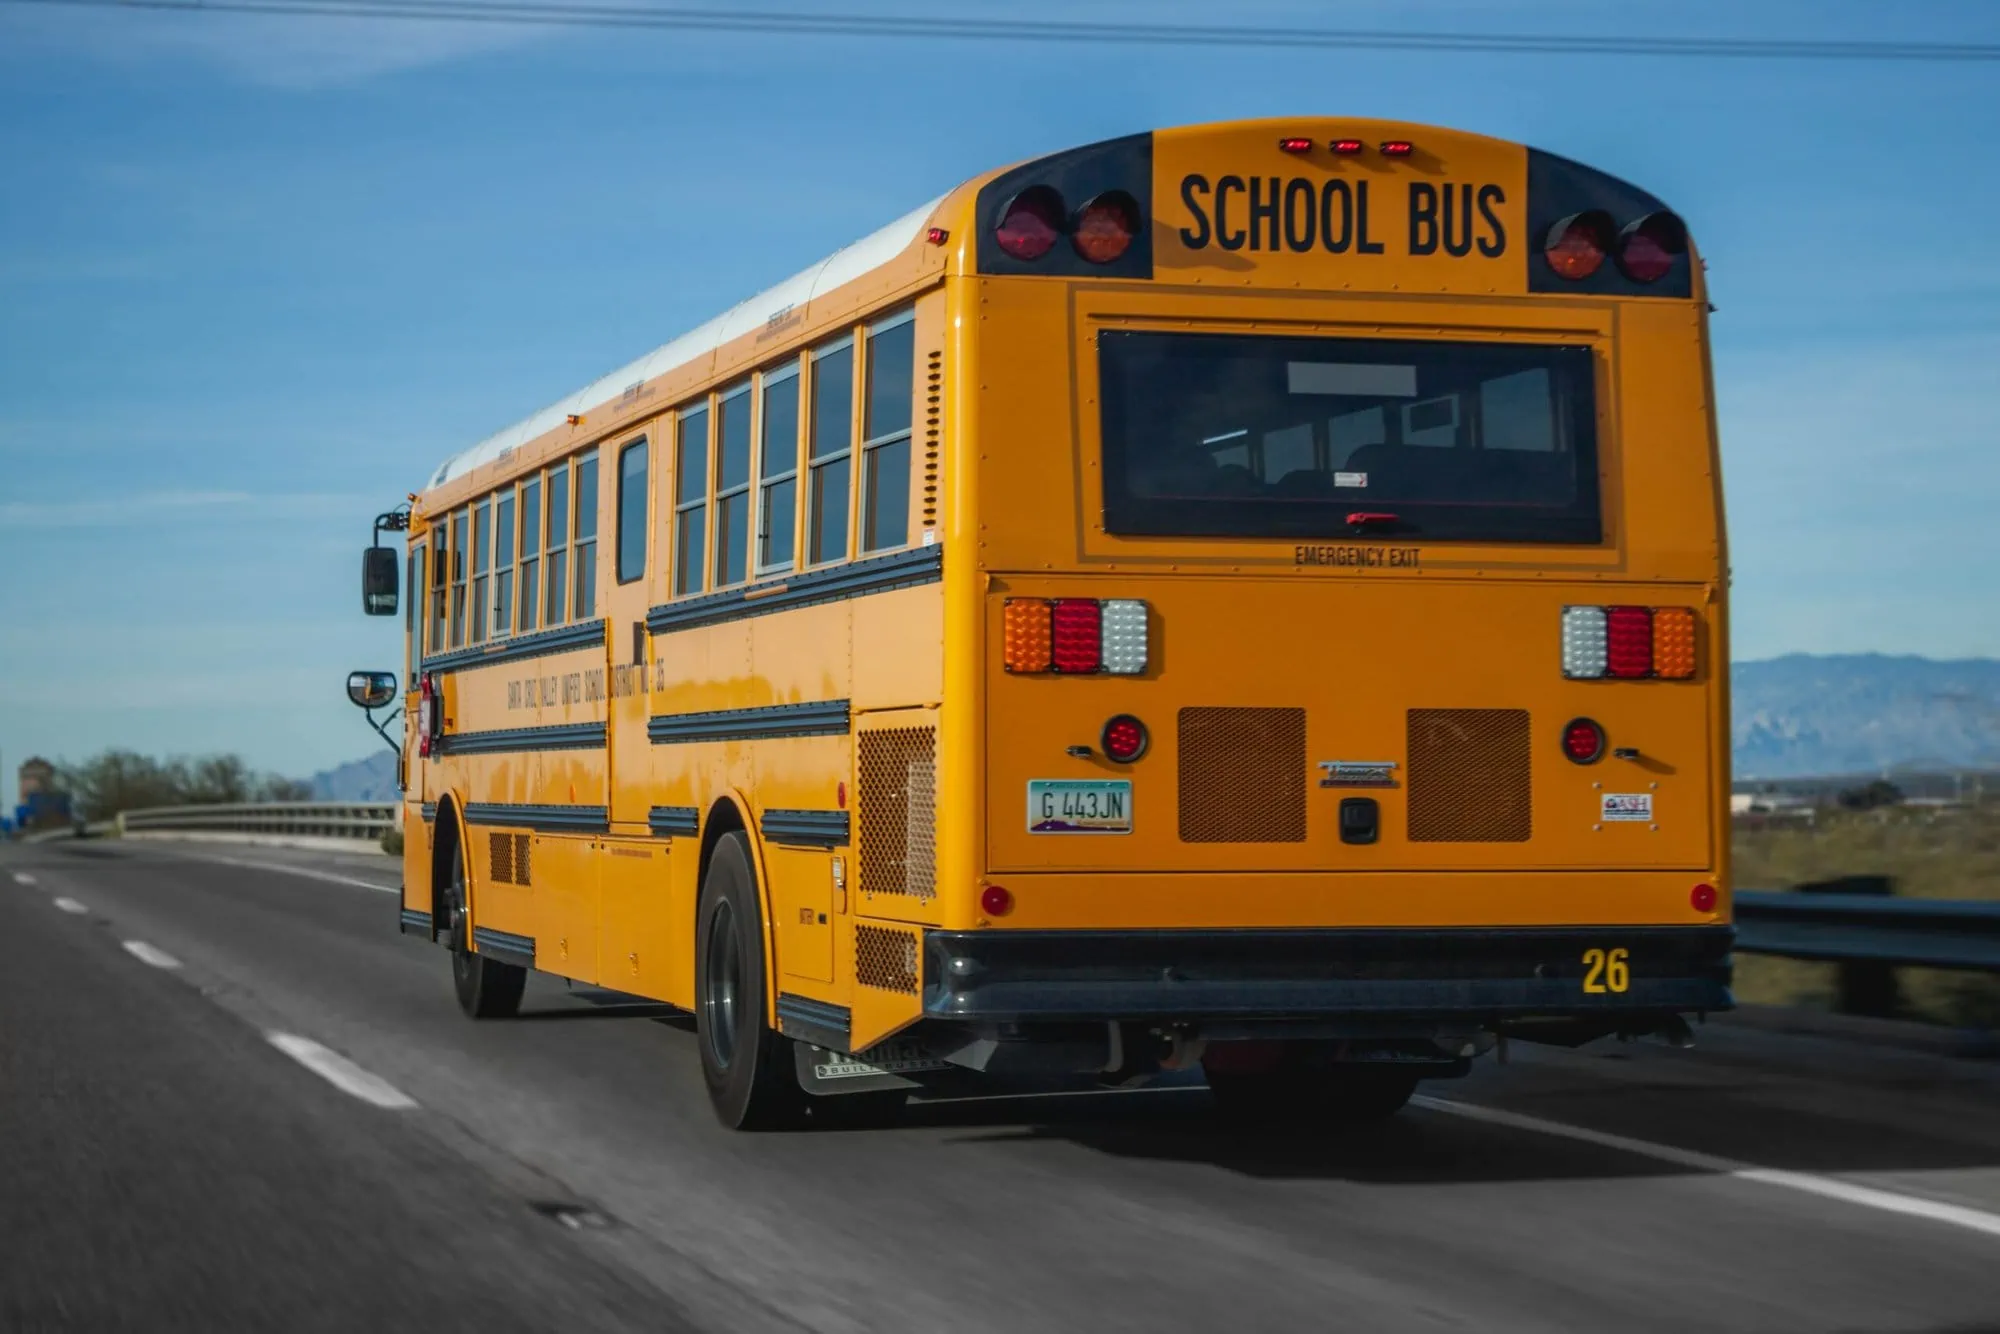 School bus gps solution for this bus on the road